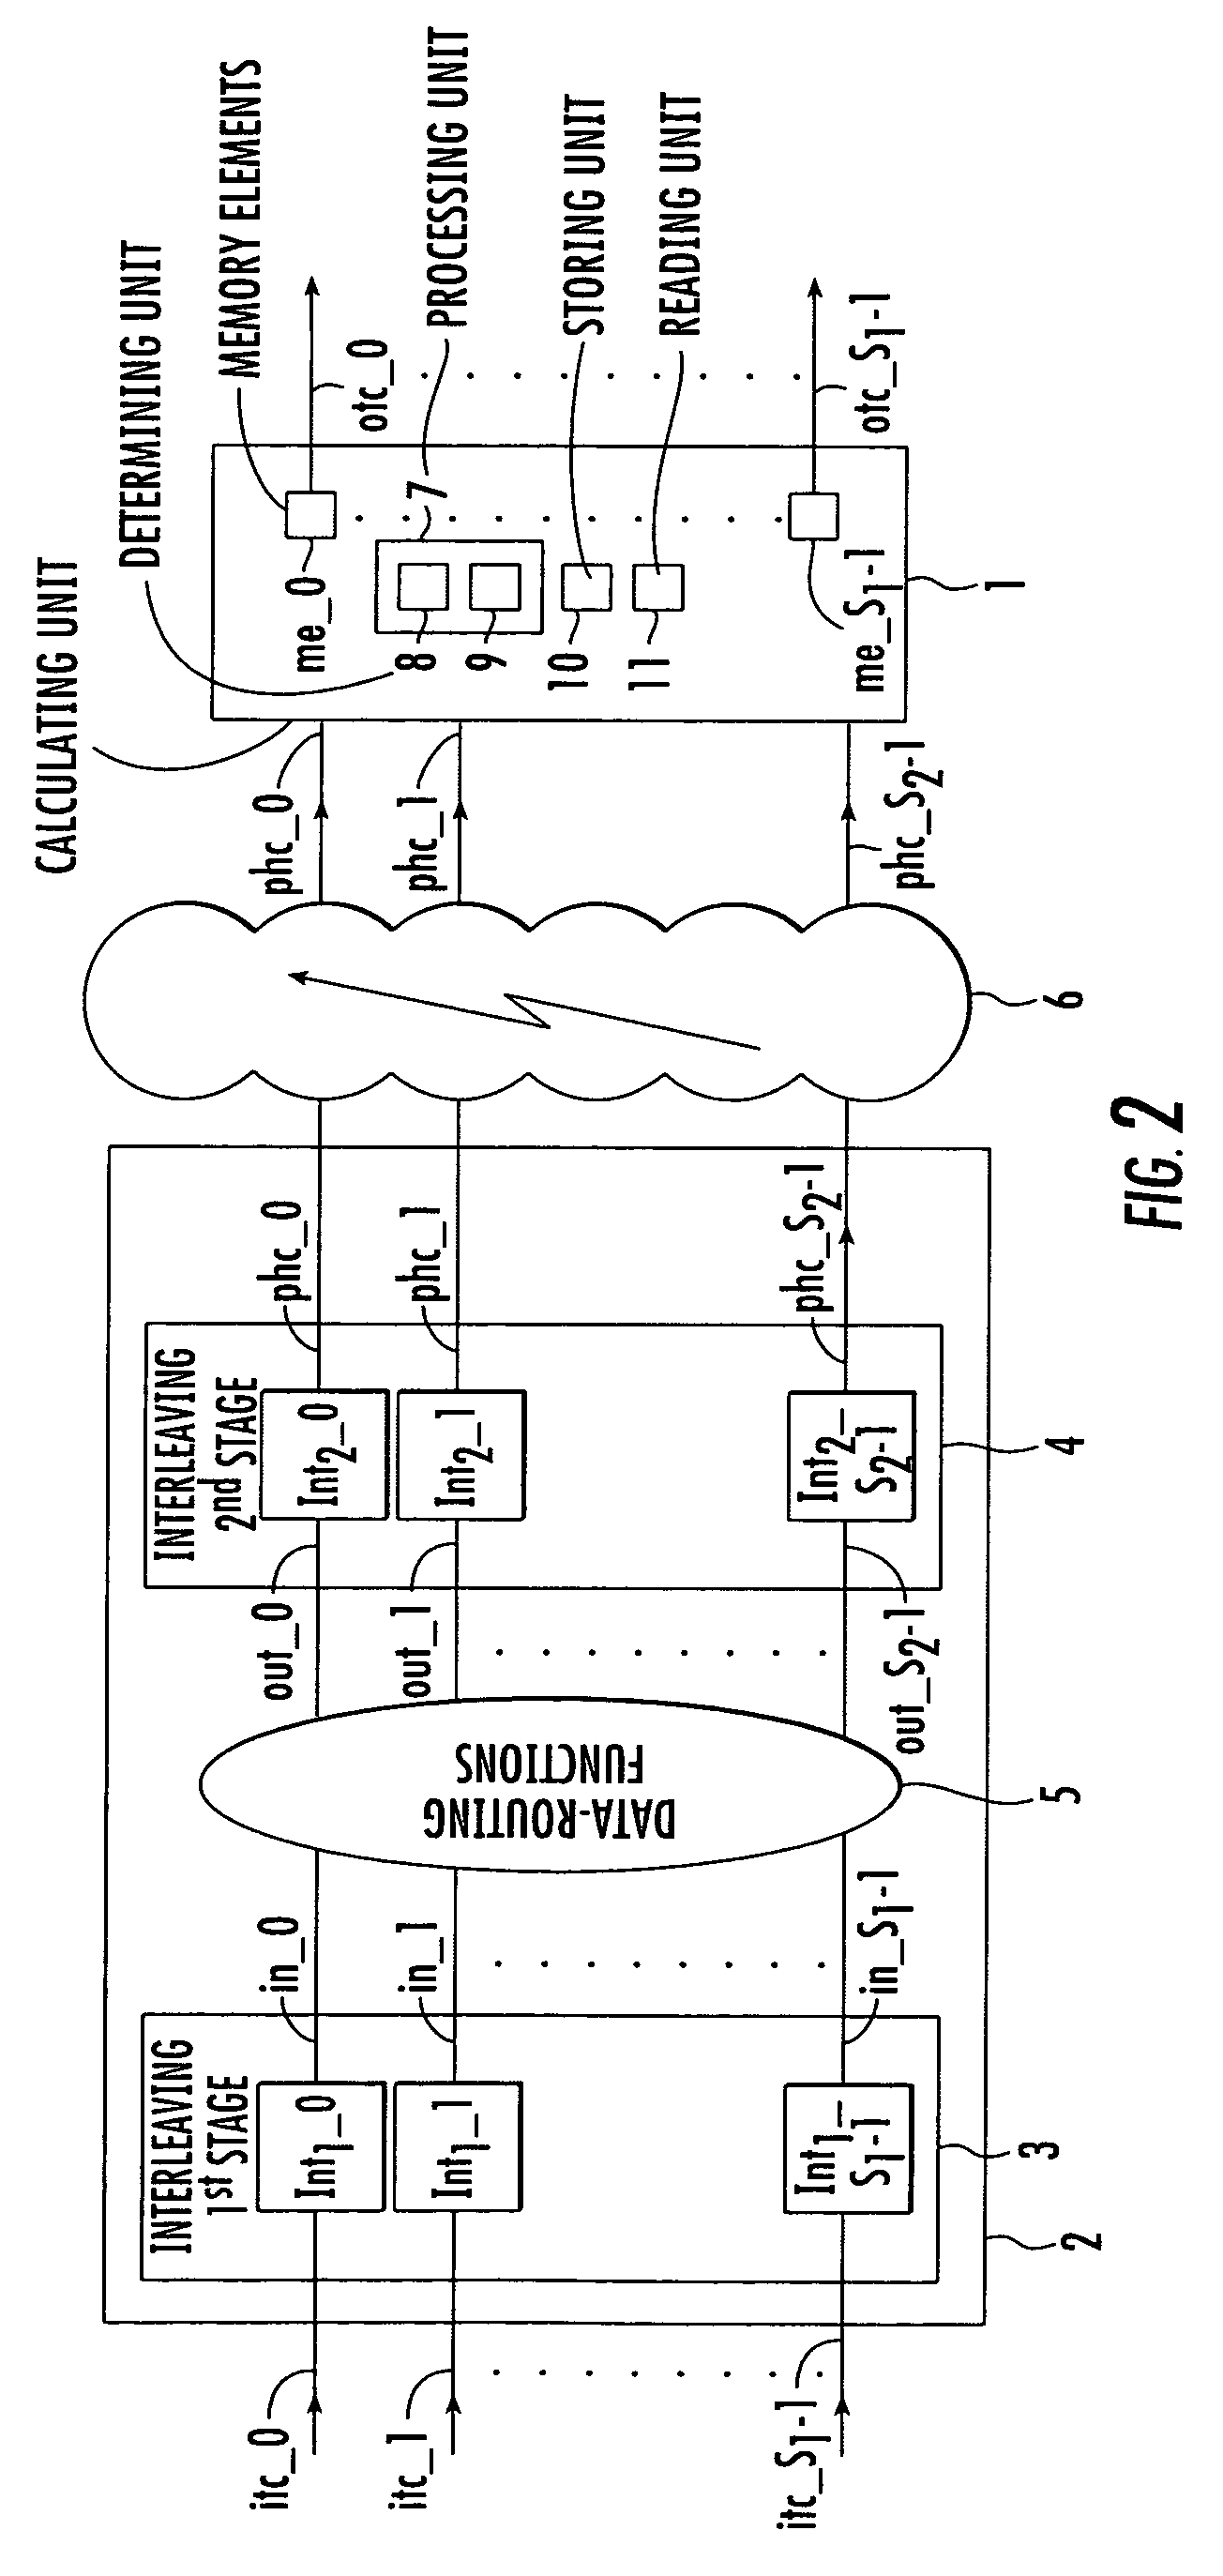 Method of de-interleaving interleaved data samples sequences, and associated system